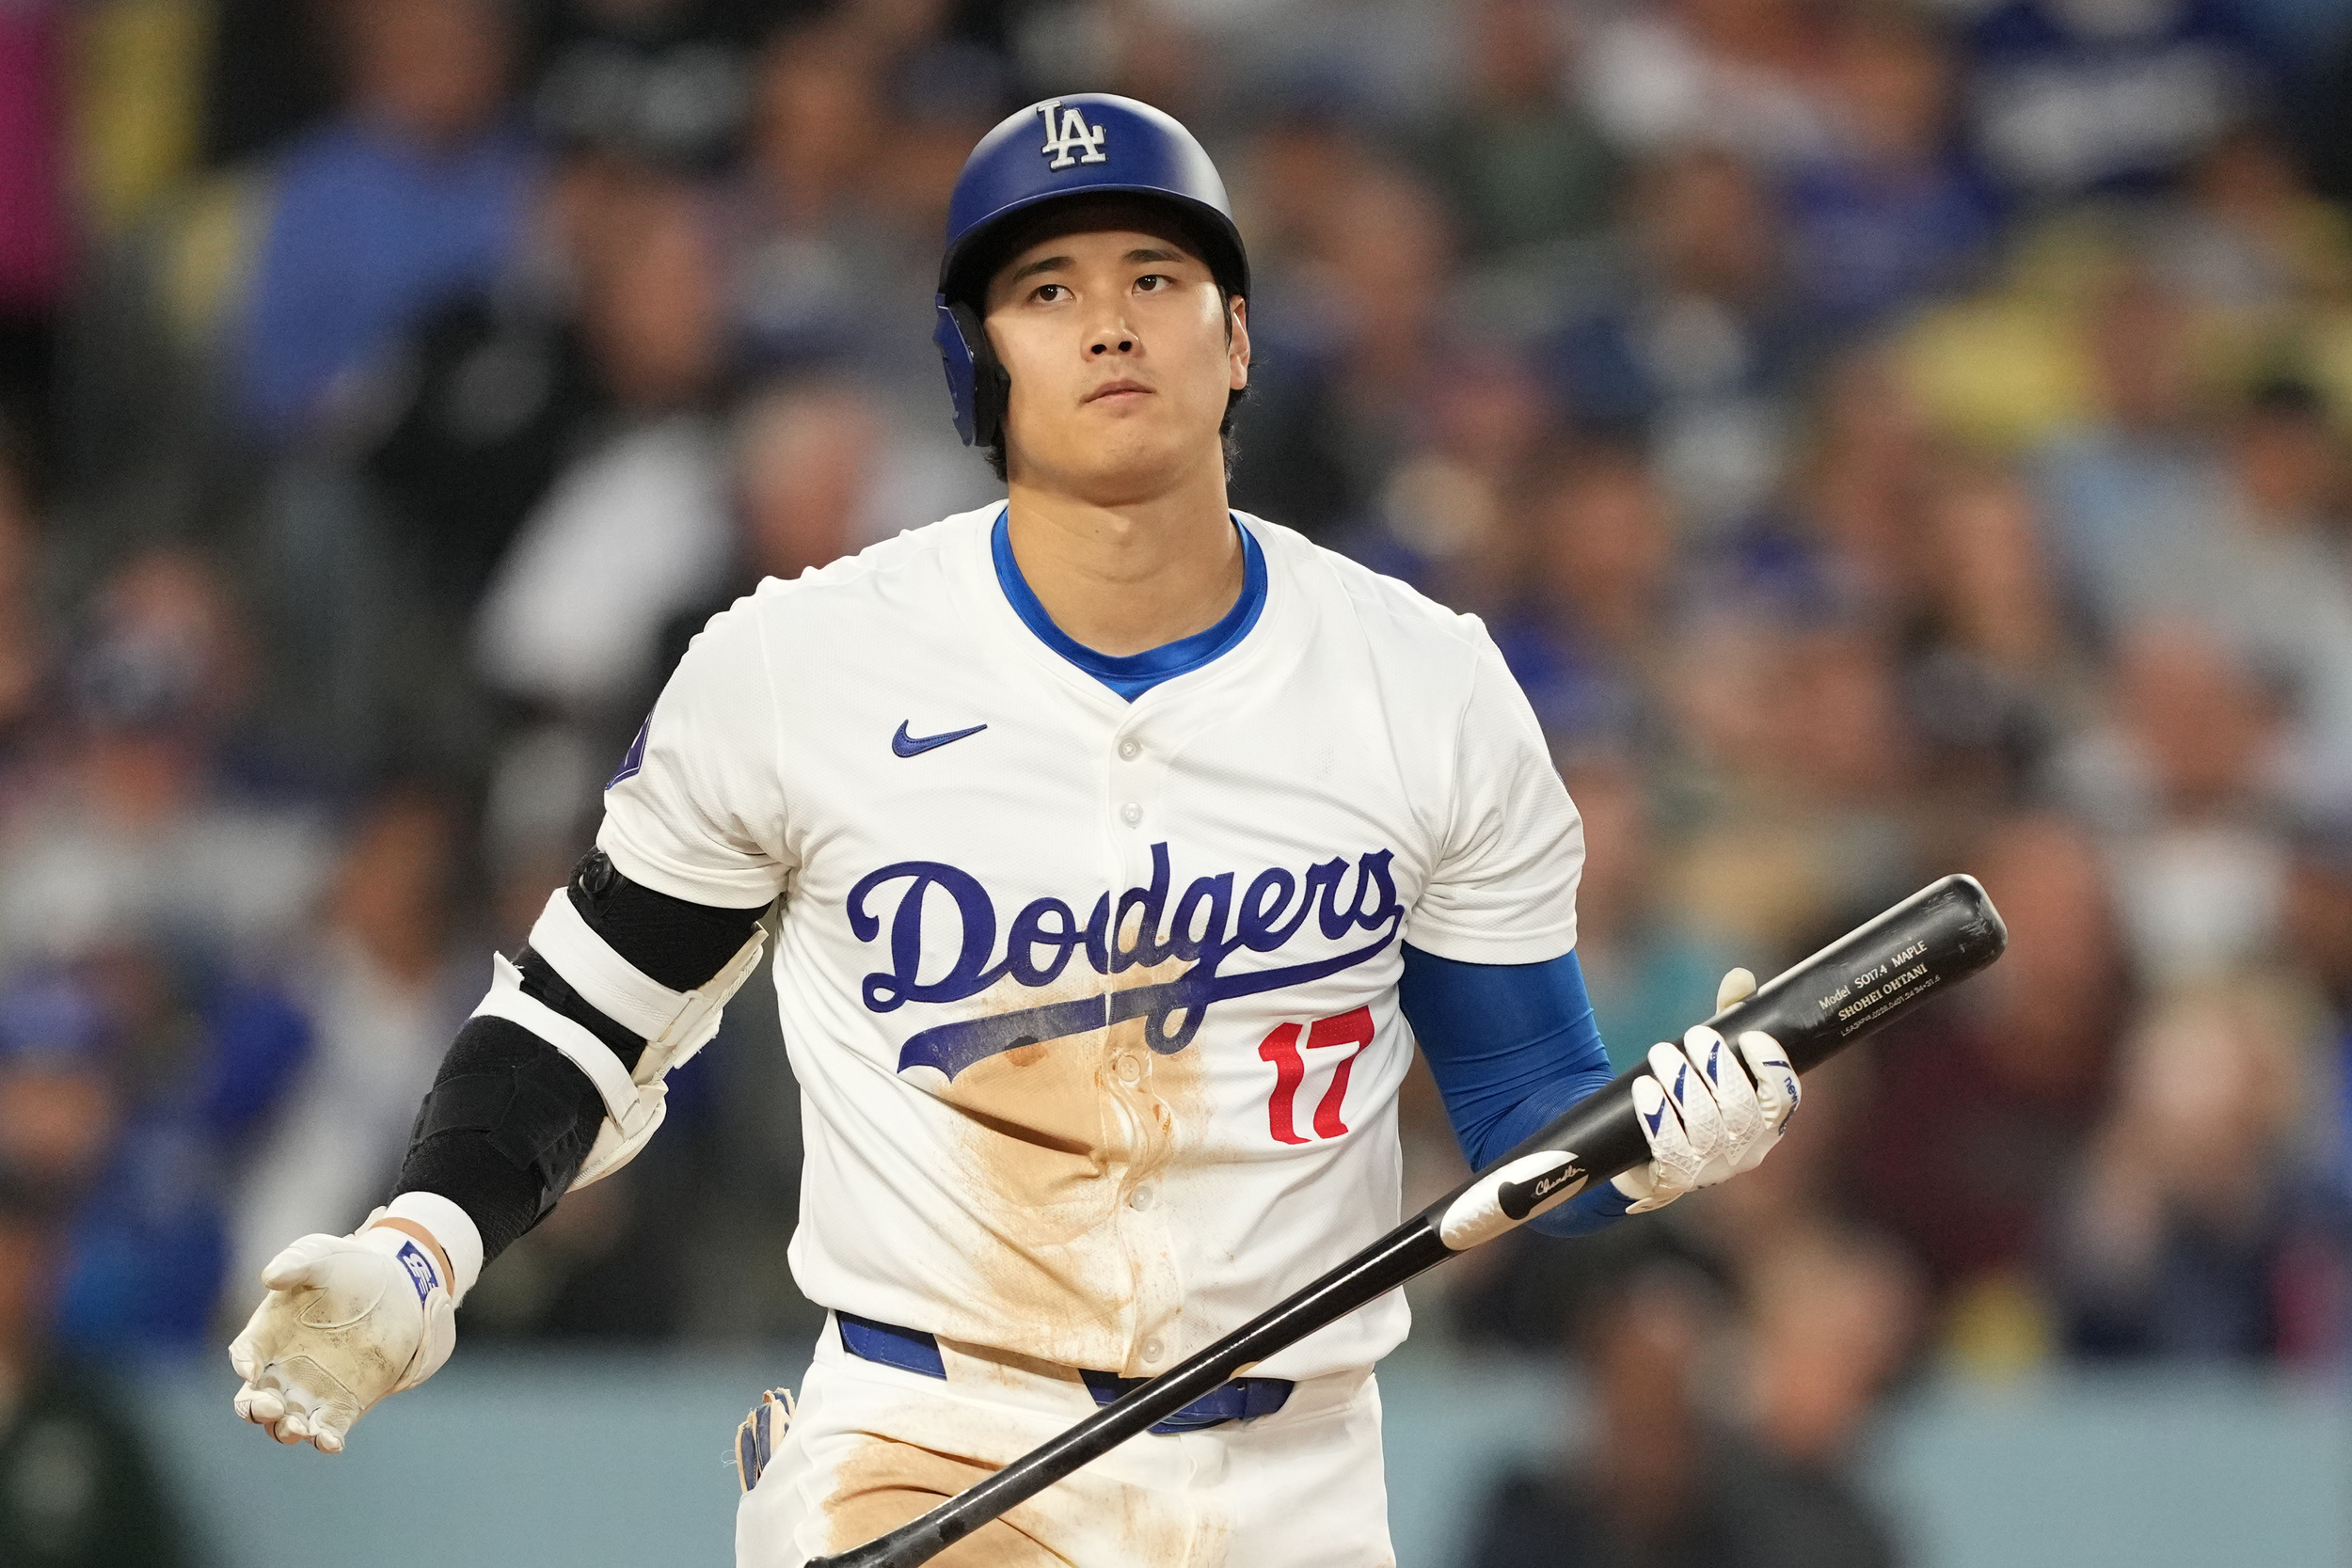 shohei ohtani showing what would happen if he only focused on hitting